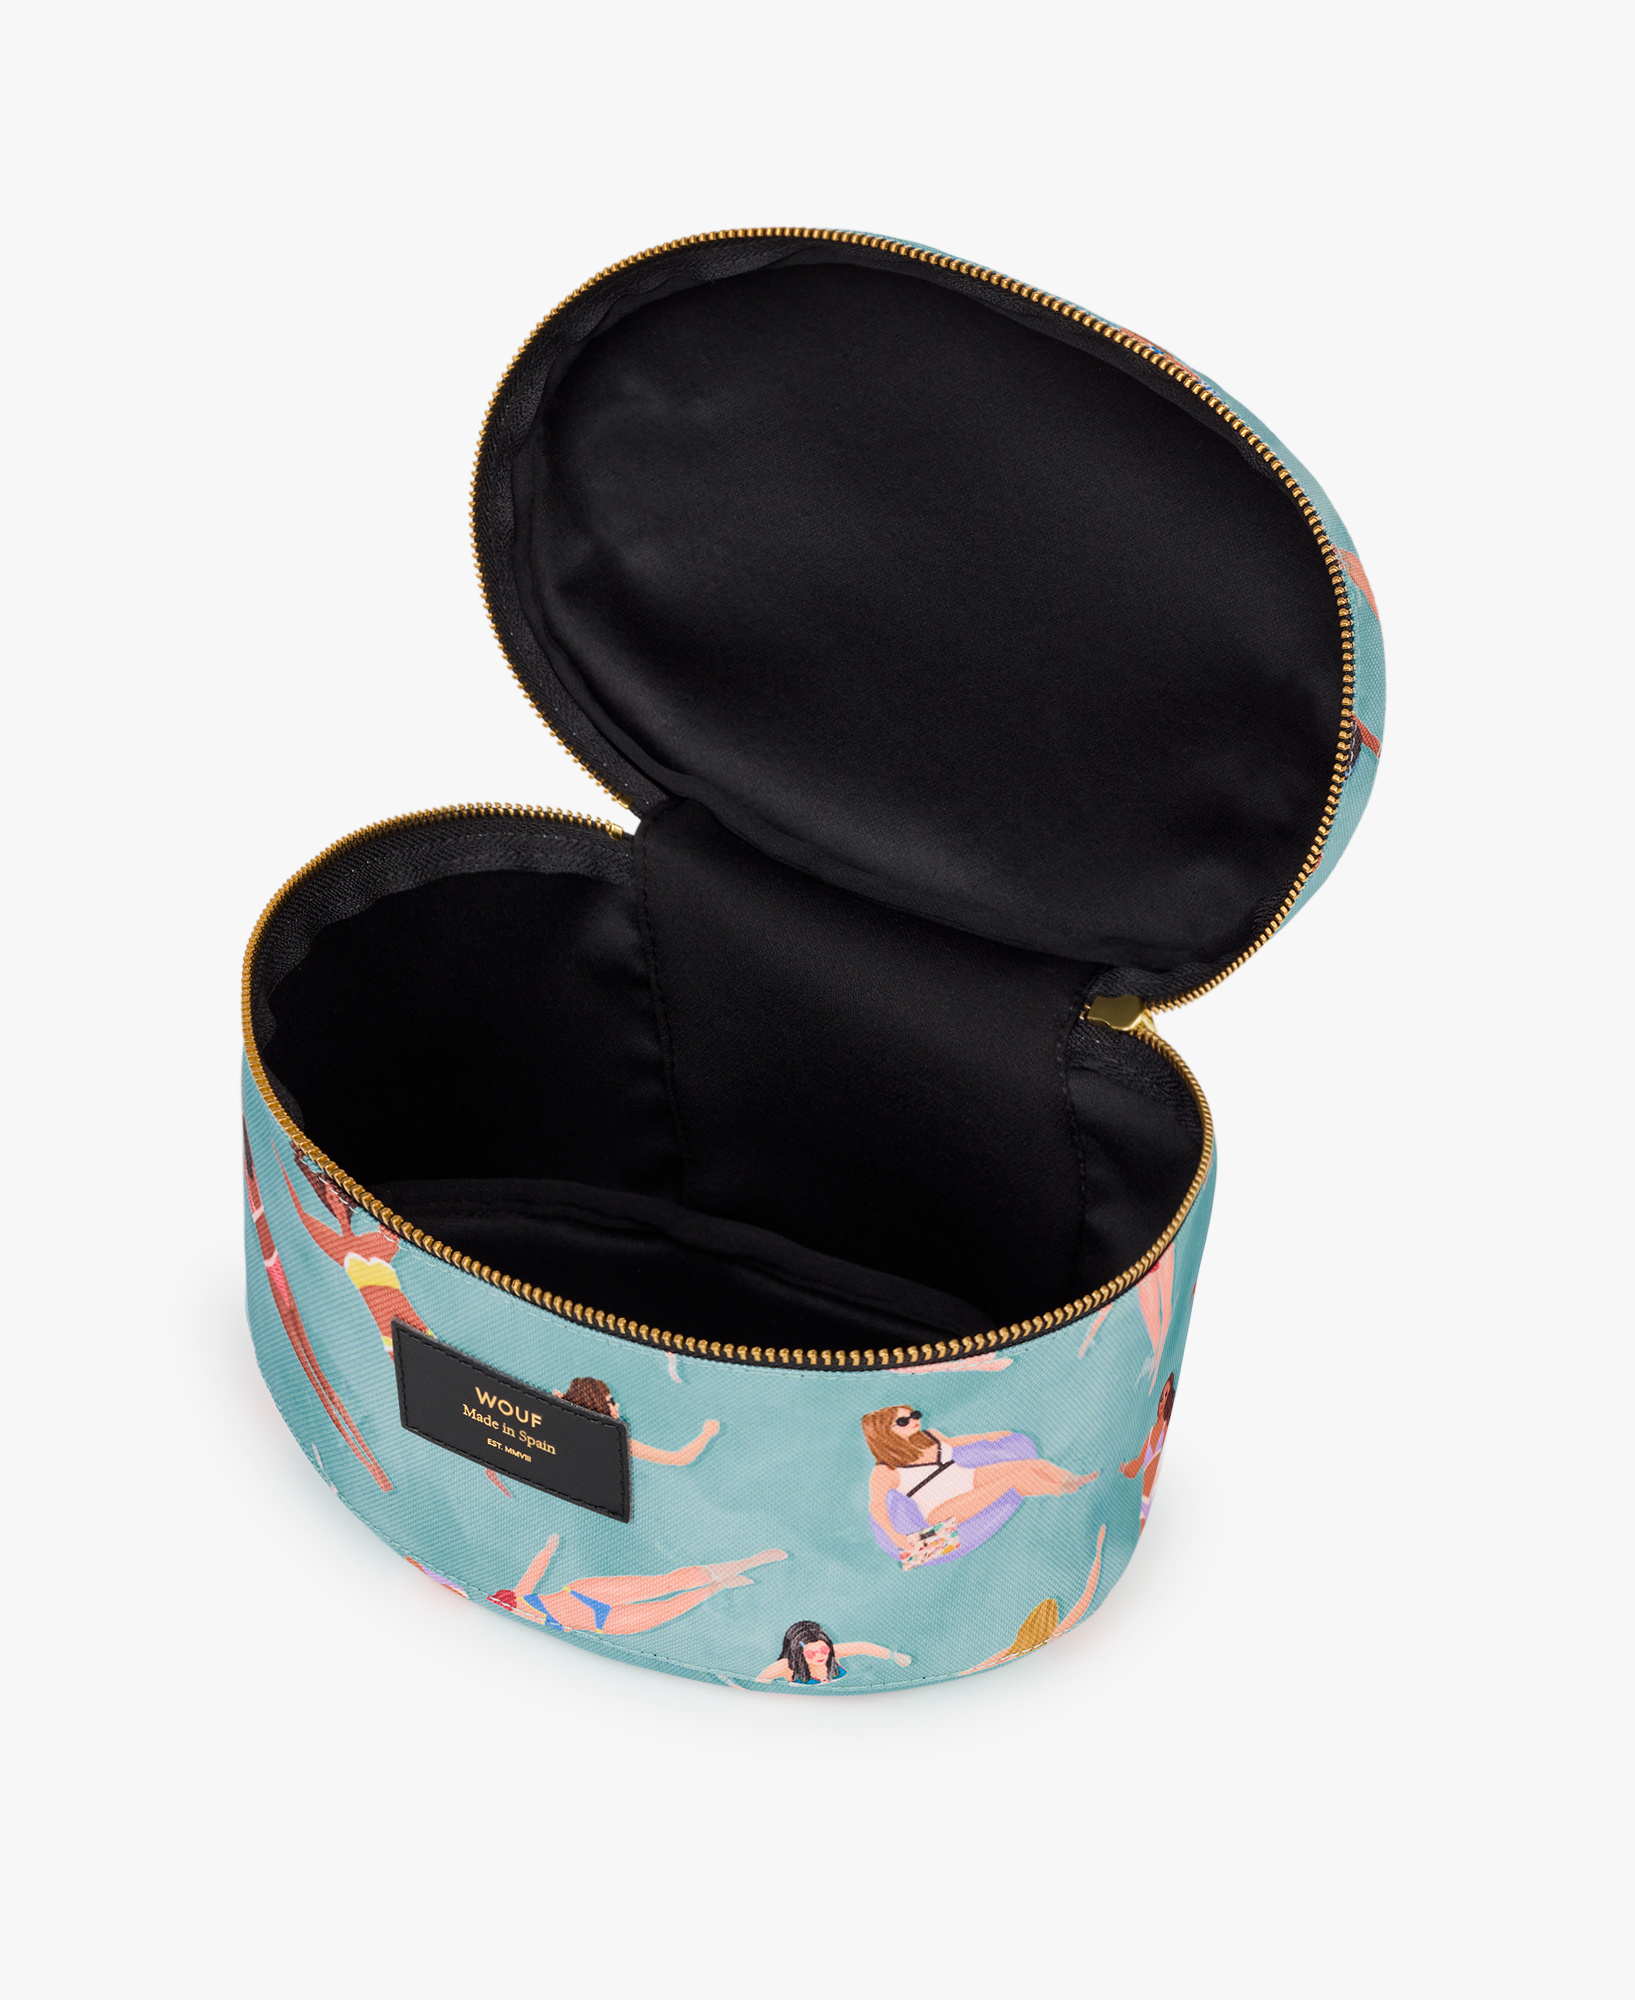 WOUF-XL-Makeup-Bag-Swimmers-Inside